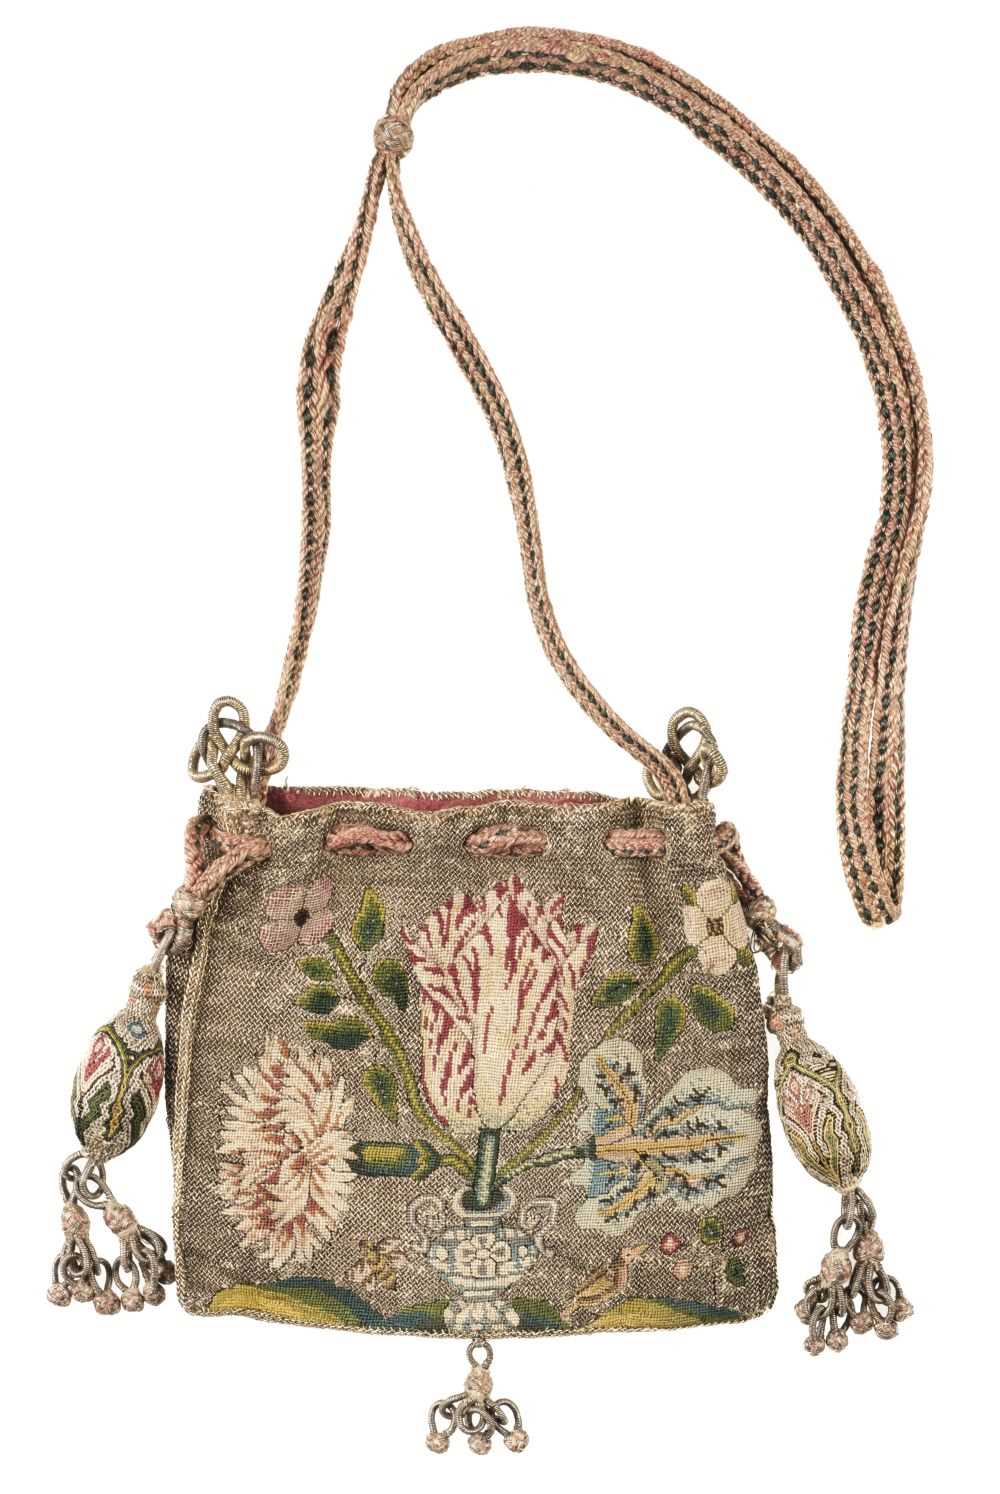 558 - Embroidered reticule. A drawstring purse or sweet bag, British, early 17th century